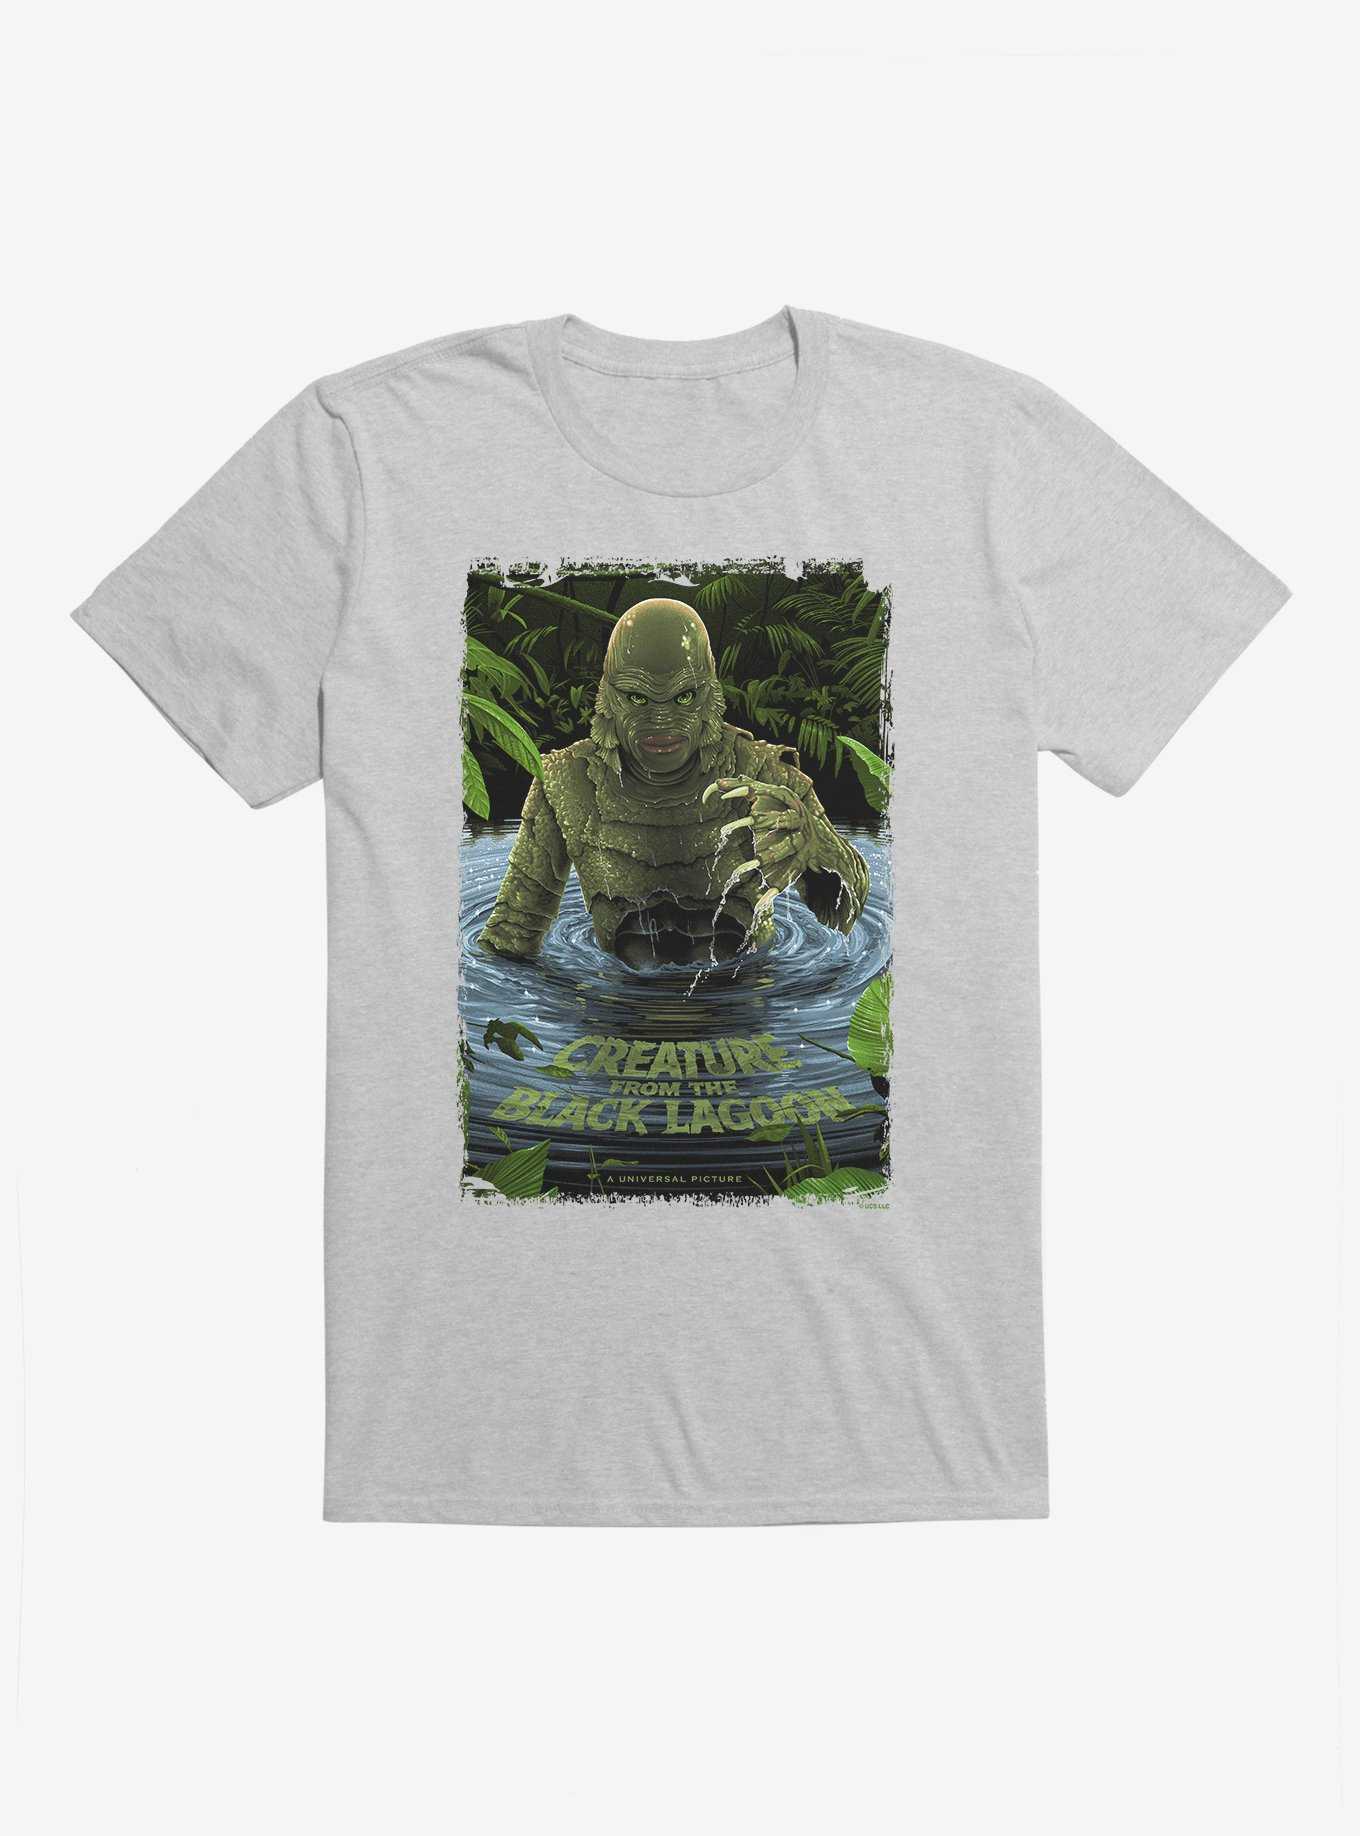 Creature From The Black Lagoon Original Horror Show Movie Poster T-Shirt, , hi-res